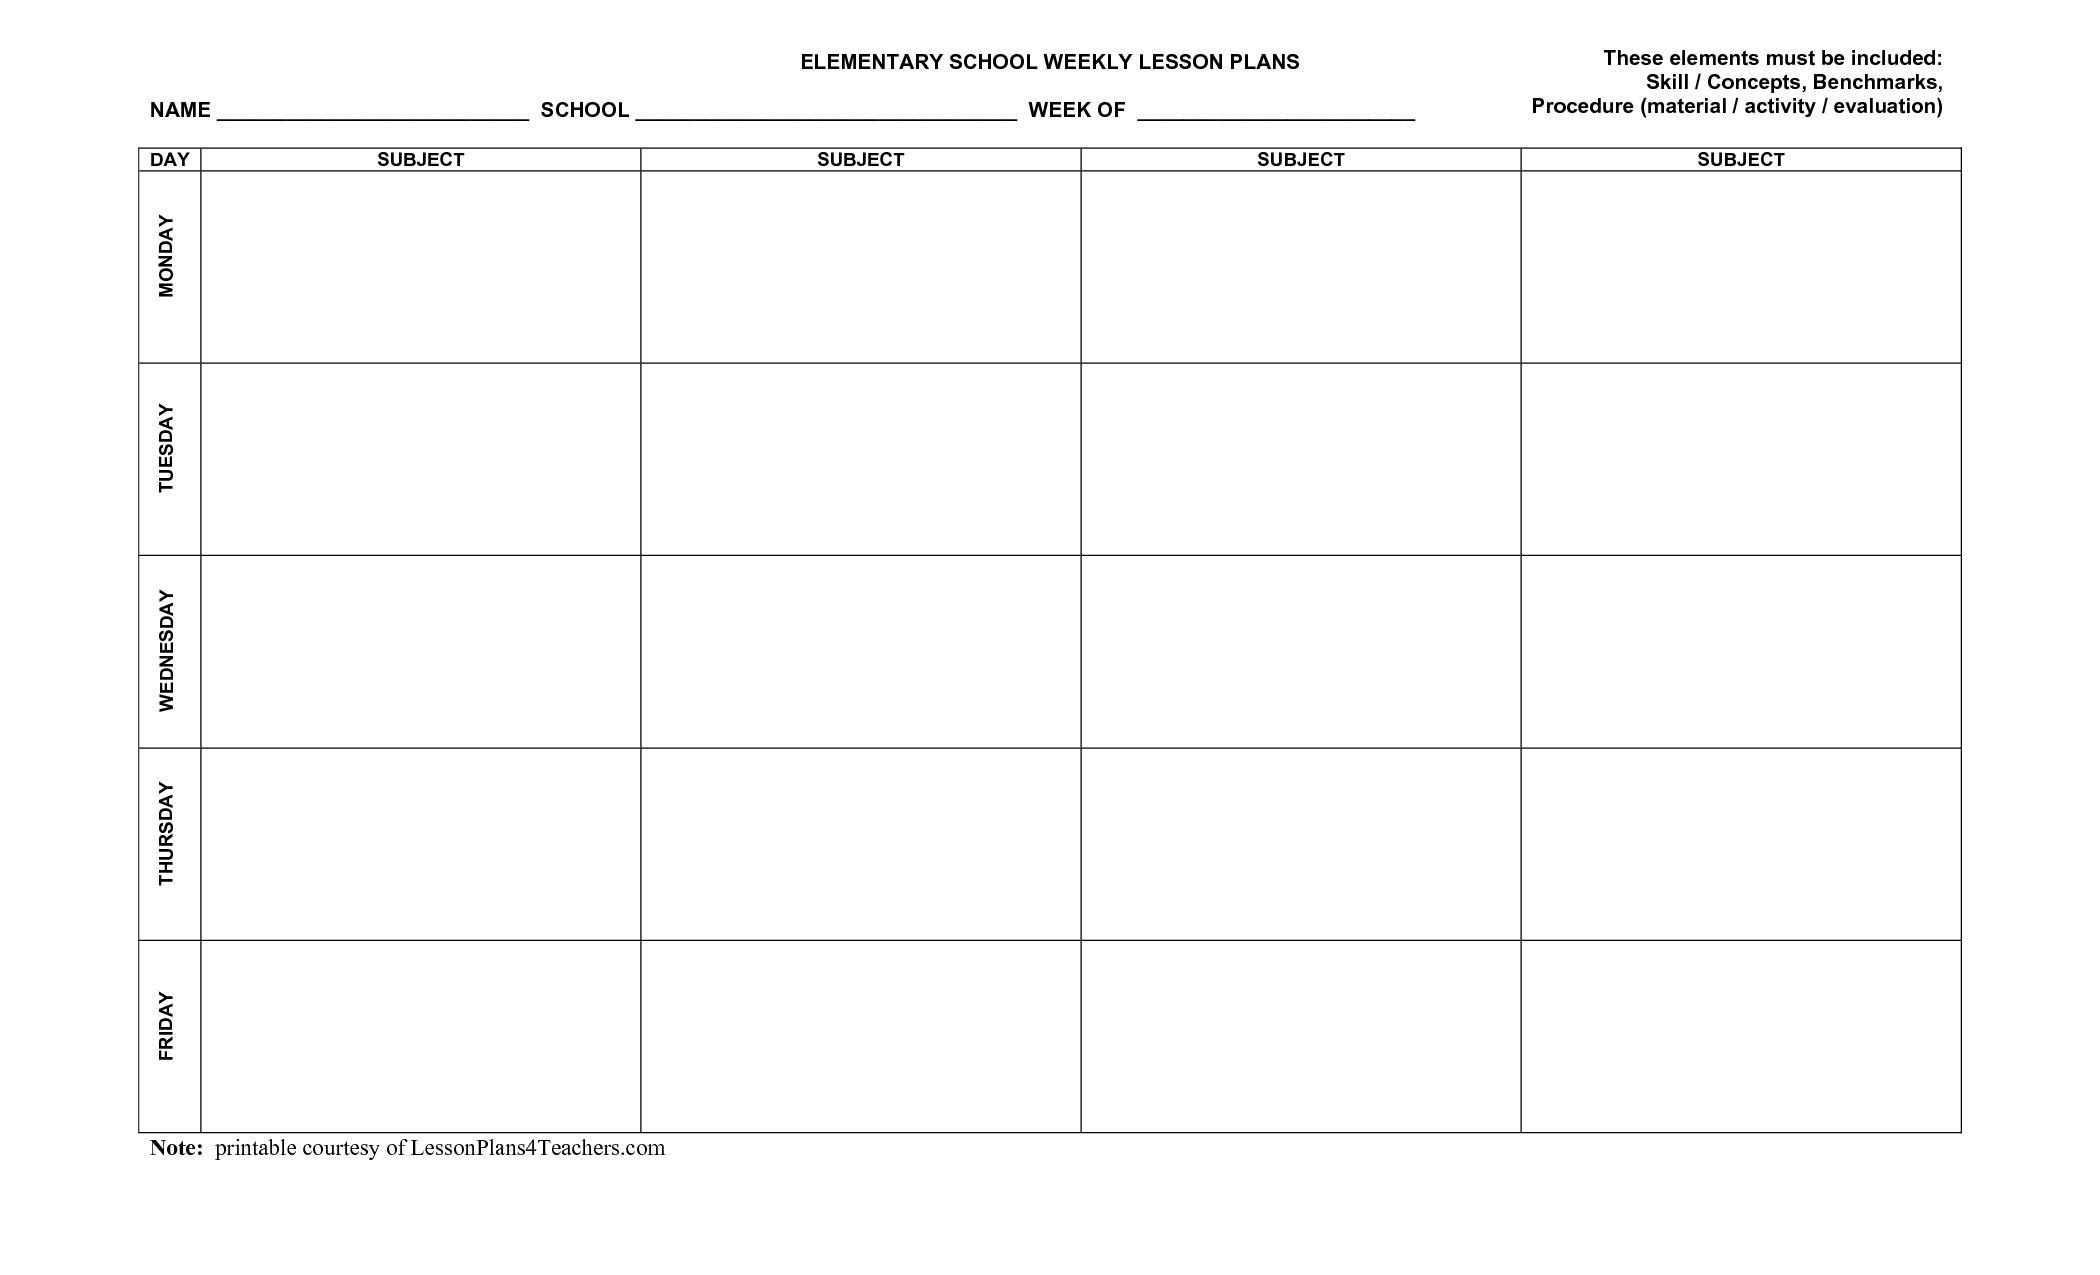 Elementary Lesson Plan Template | Weekly Elementary Lesson-Weekly Lesson Plan Calendar Template